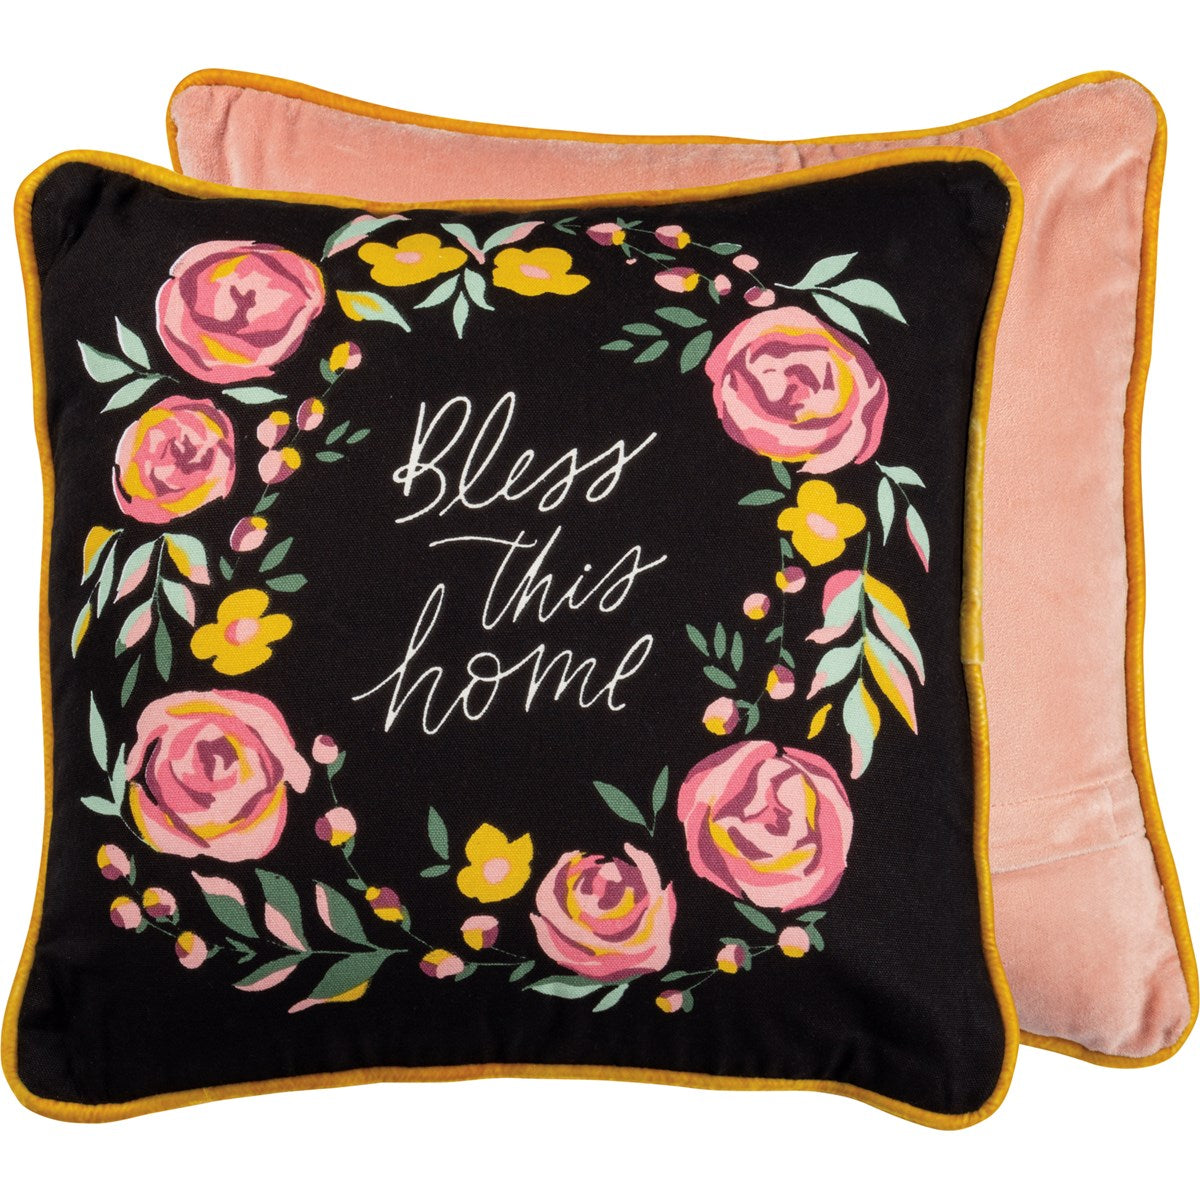 Bless this home (pillow)